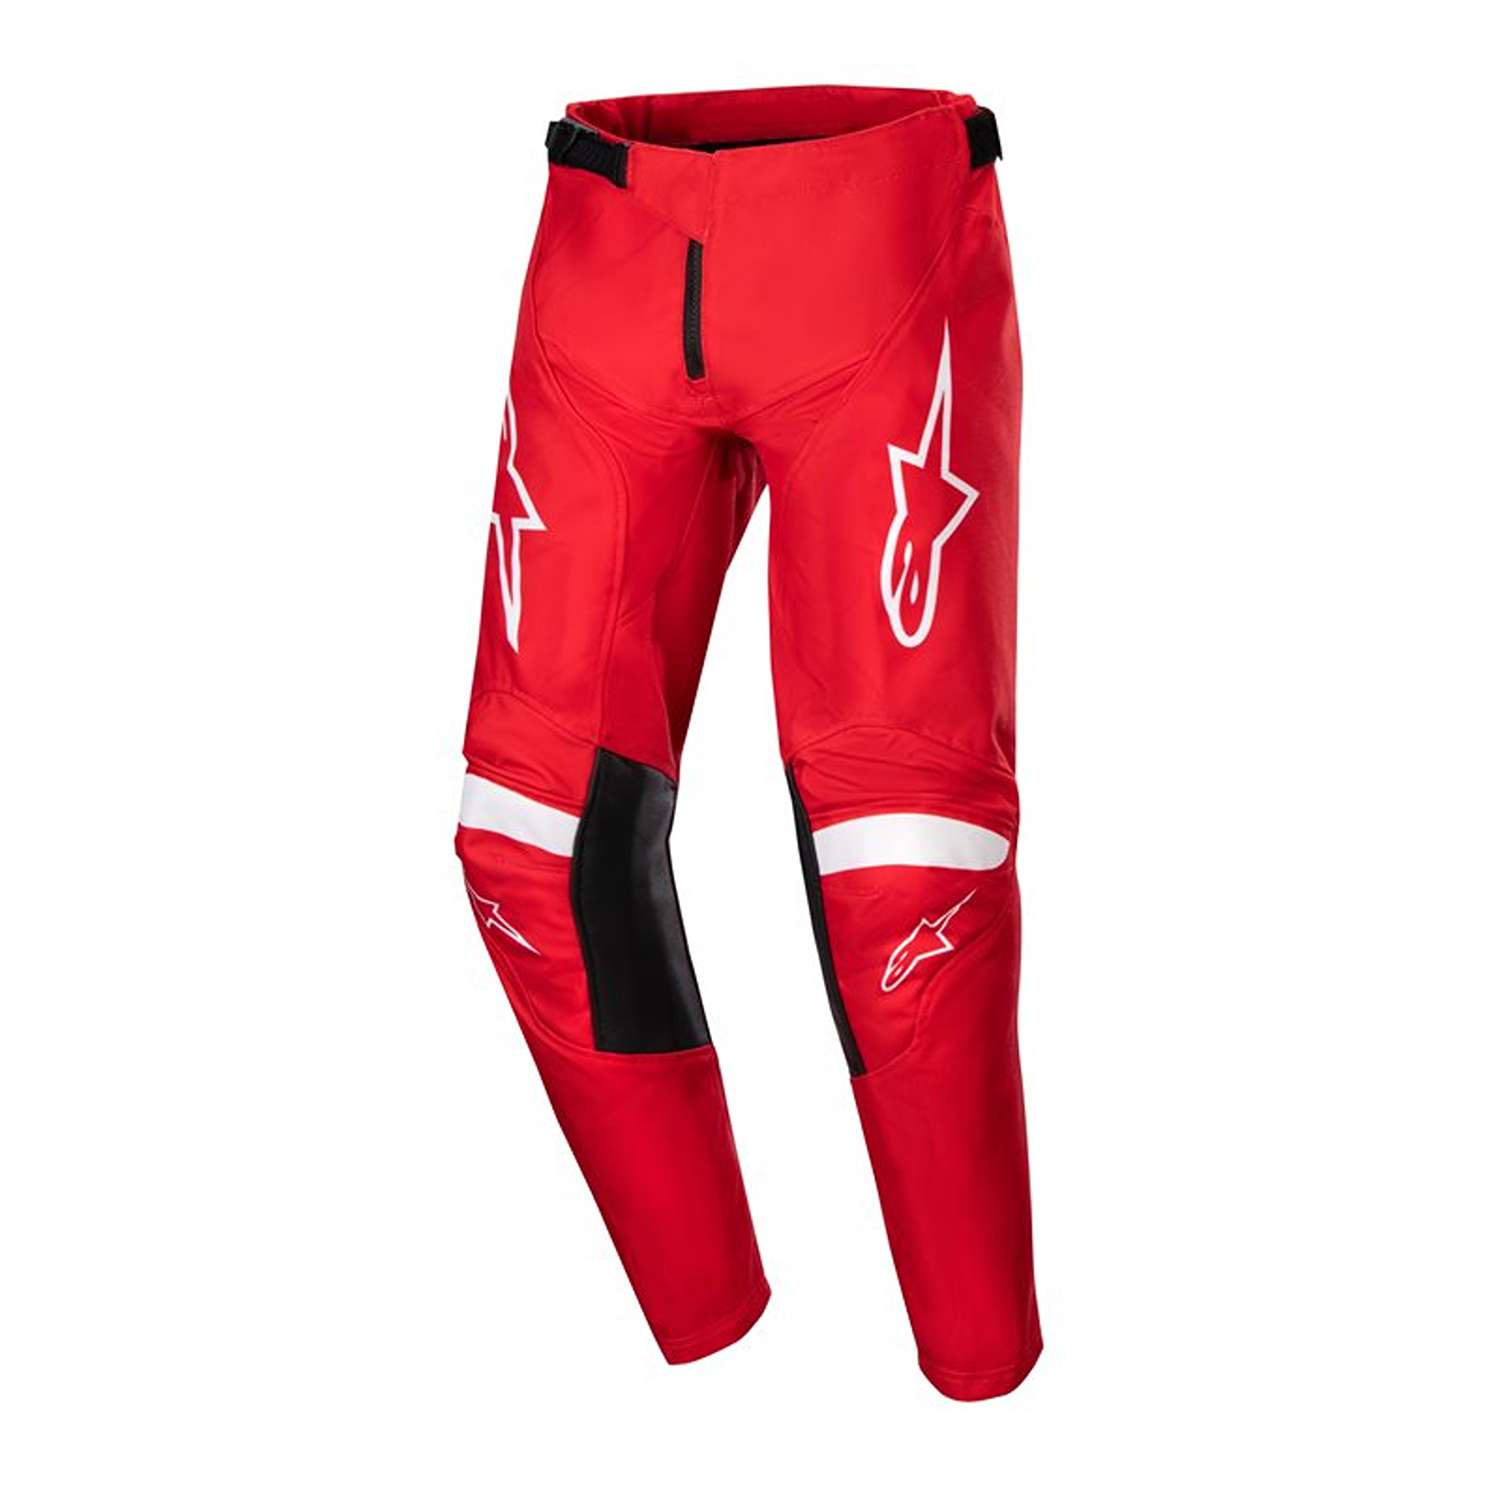 Image of EU Alpinestars Youth Racer Lurv Pants Mars Red White Taille 28